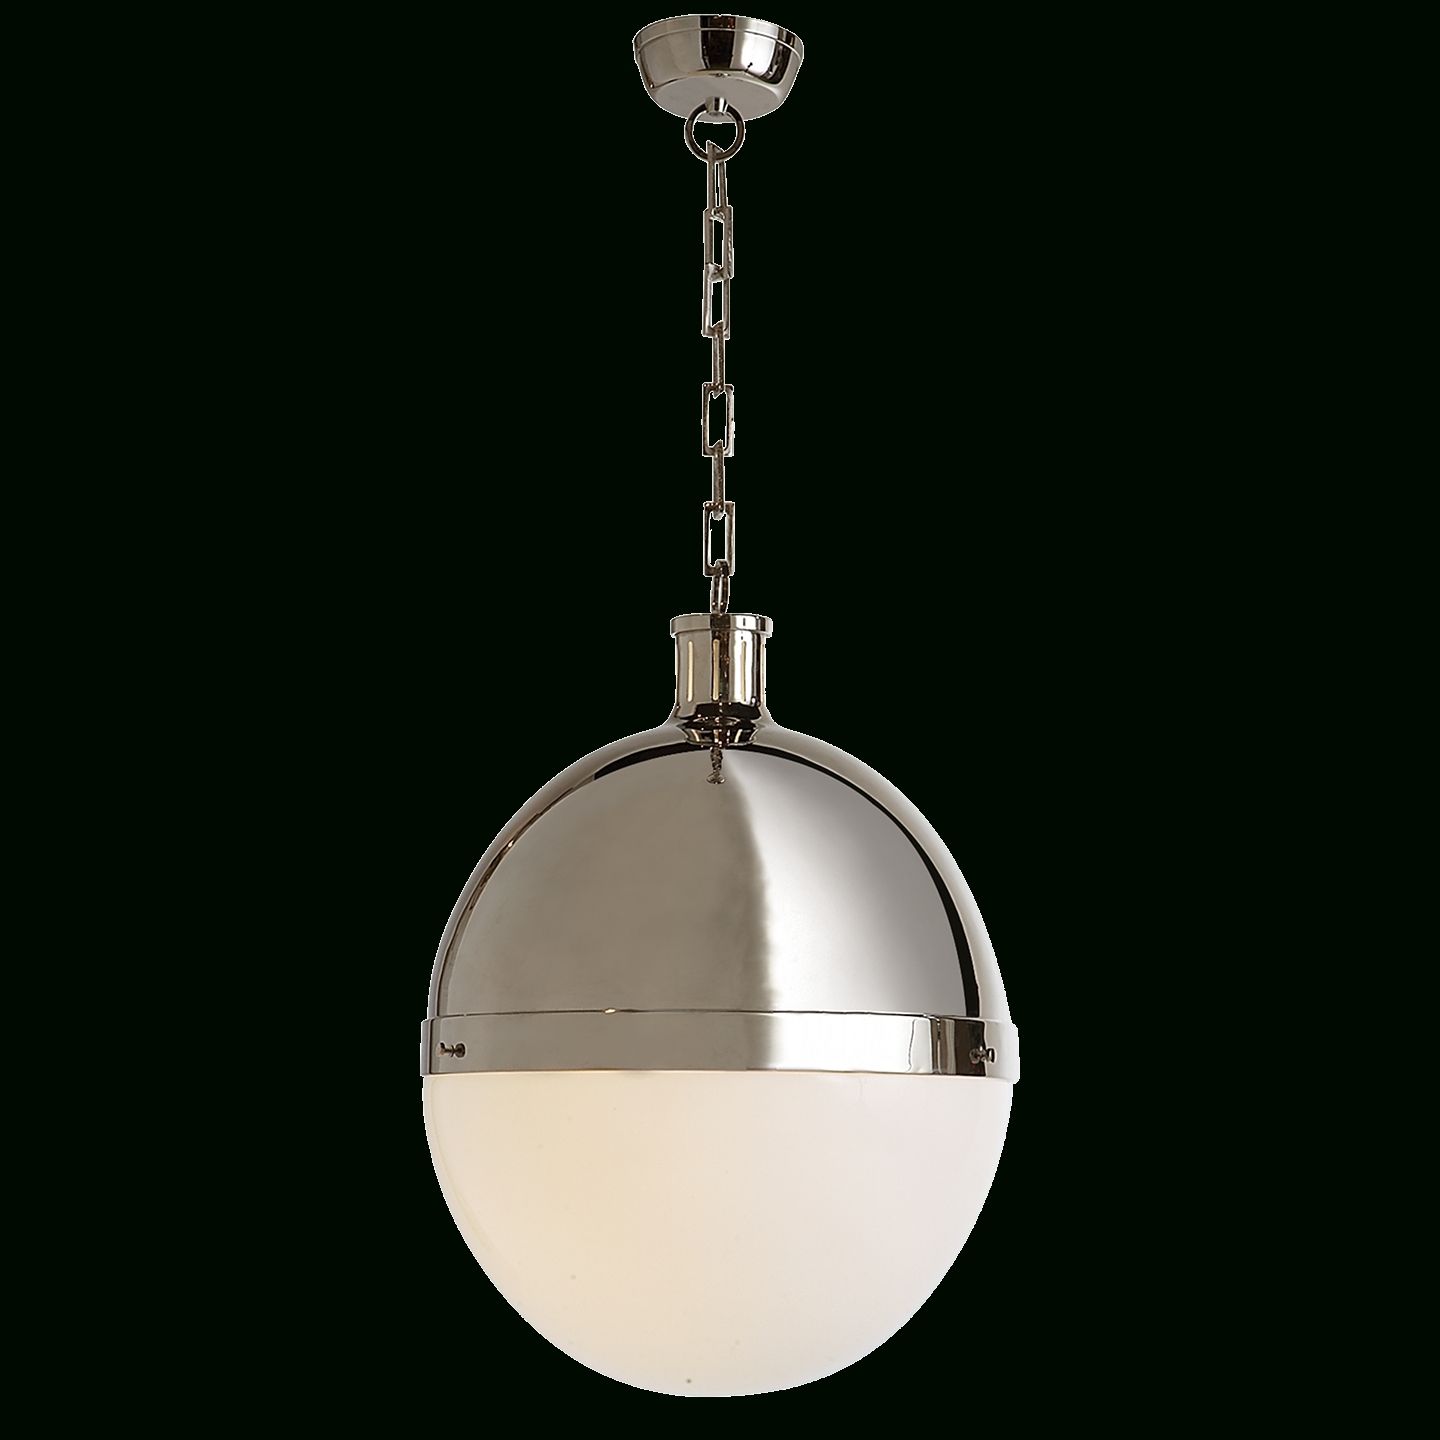 Hicks Pendant Extra Large Polished Nickel Pertaining To Hicks Pendants (View 10 of 15)